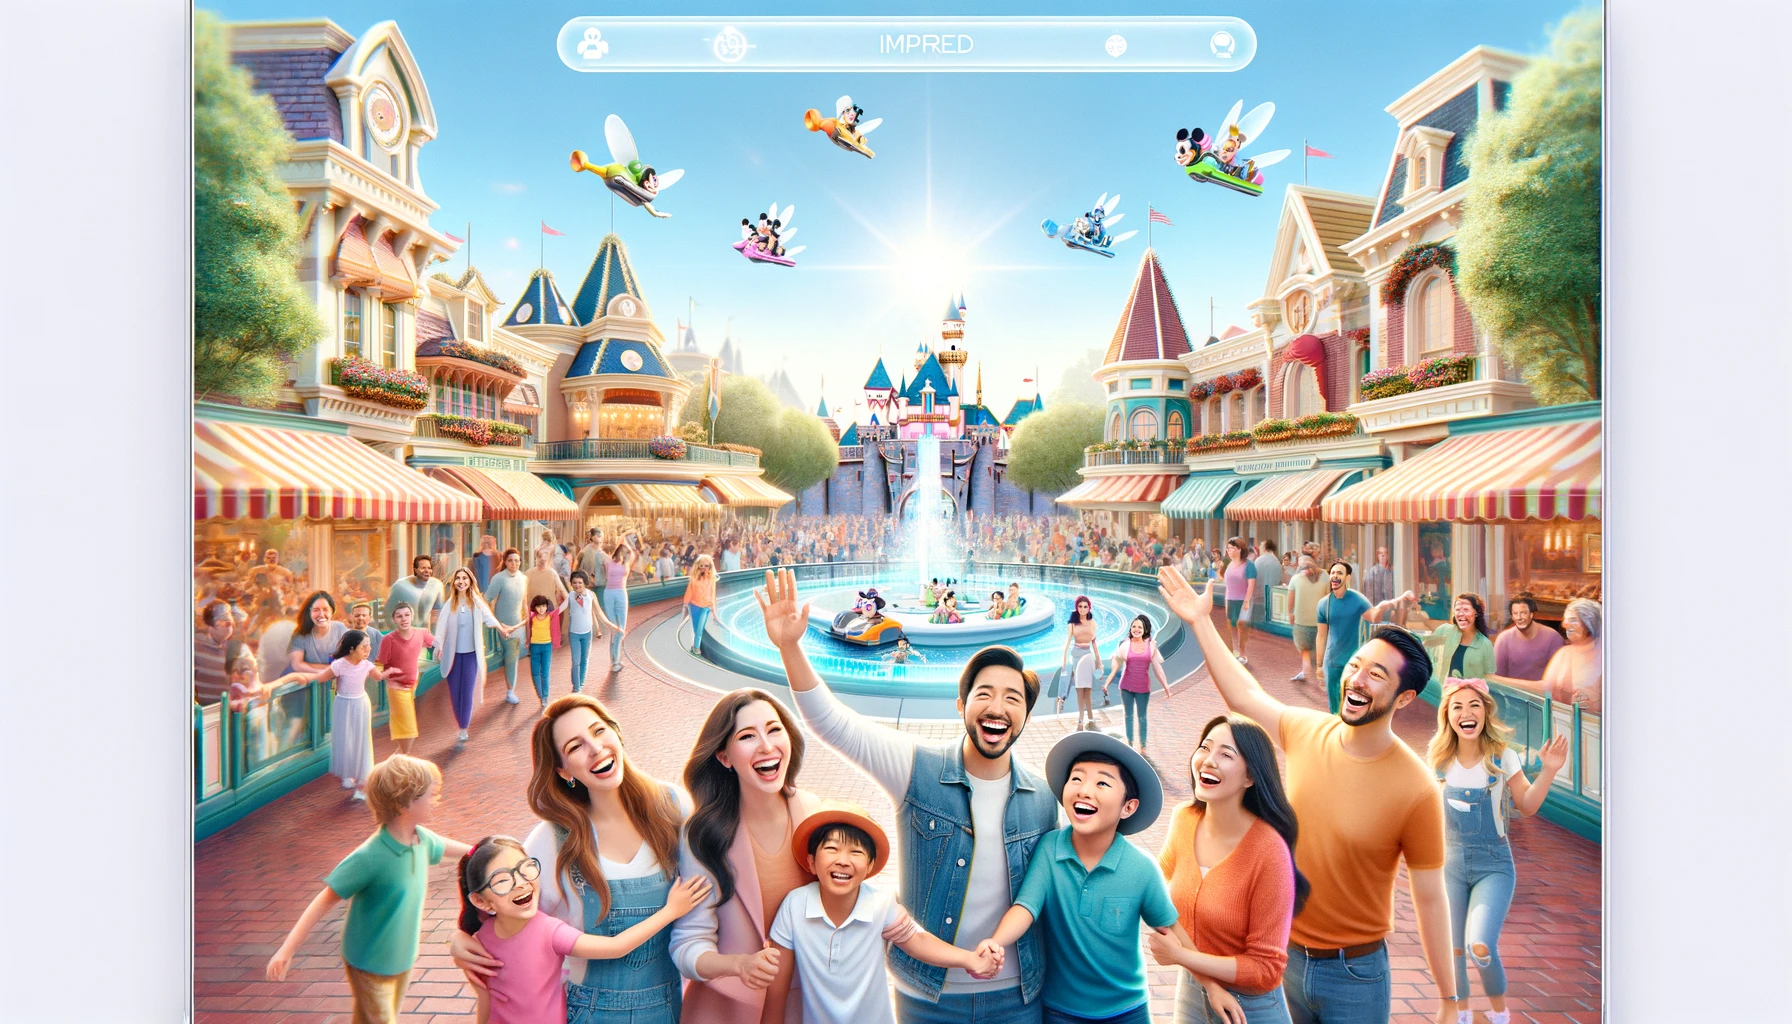 An uplifting scene at Disneyland showing improved guest experiences. The image features a happy, diverse group of visitors enjoying various park attractions with minimal wait times. There are families with children, couples, and friends, all smiling and interacting positively with cheerful staff. The park is spotlessly clean and beautifully decorated, emphasizing a sense of magic and wonder. Advanced technology is visible, with digital guides and interactive maps enhancing the guest experience. The overall atmosphere is joyful and vibrant under a sunny sky.